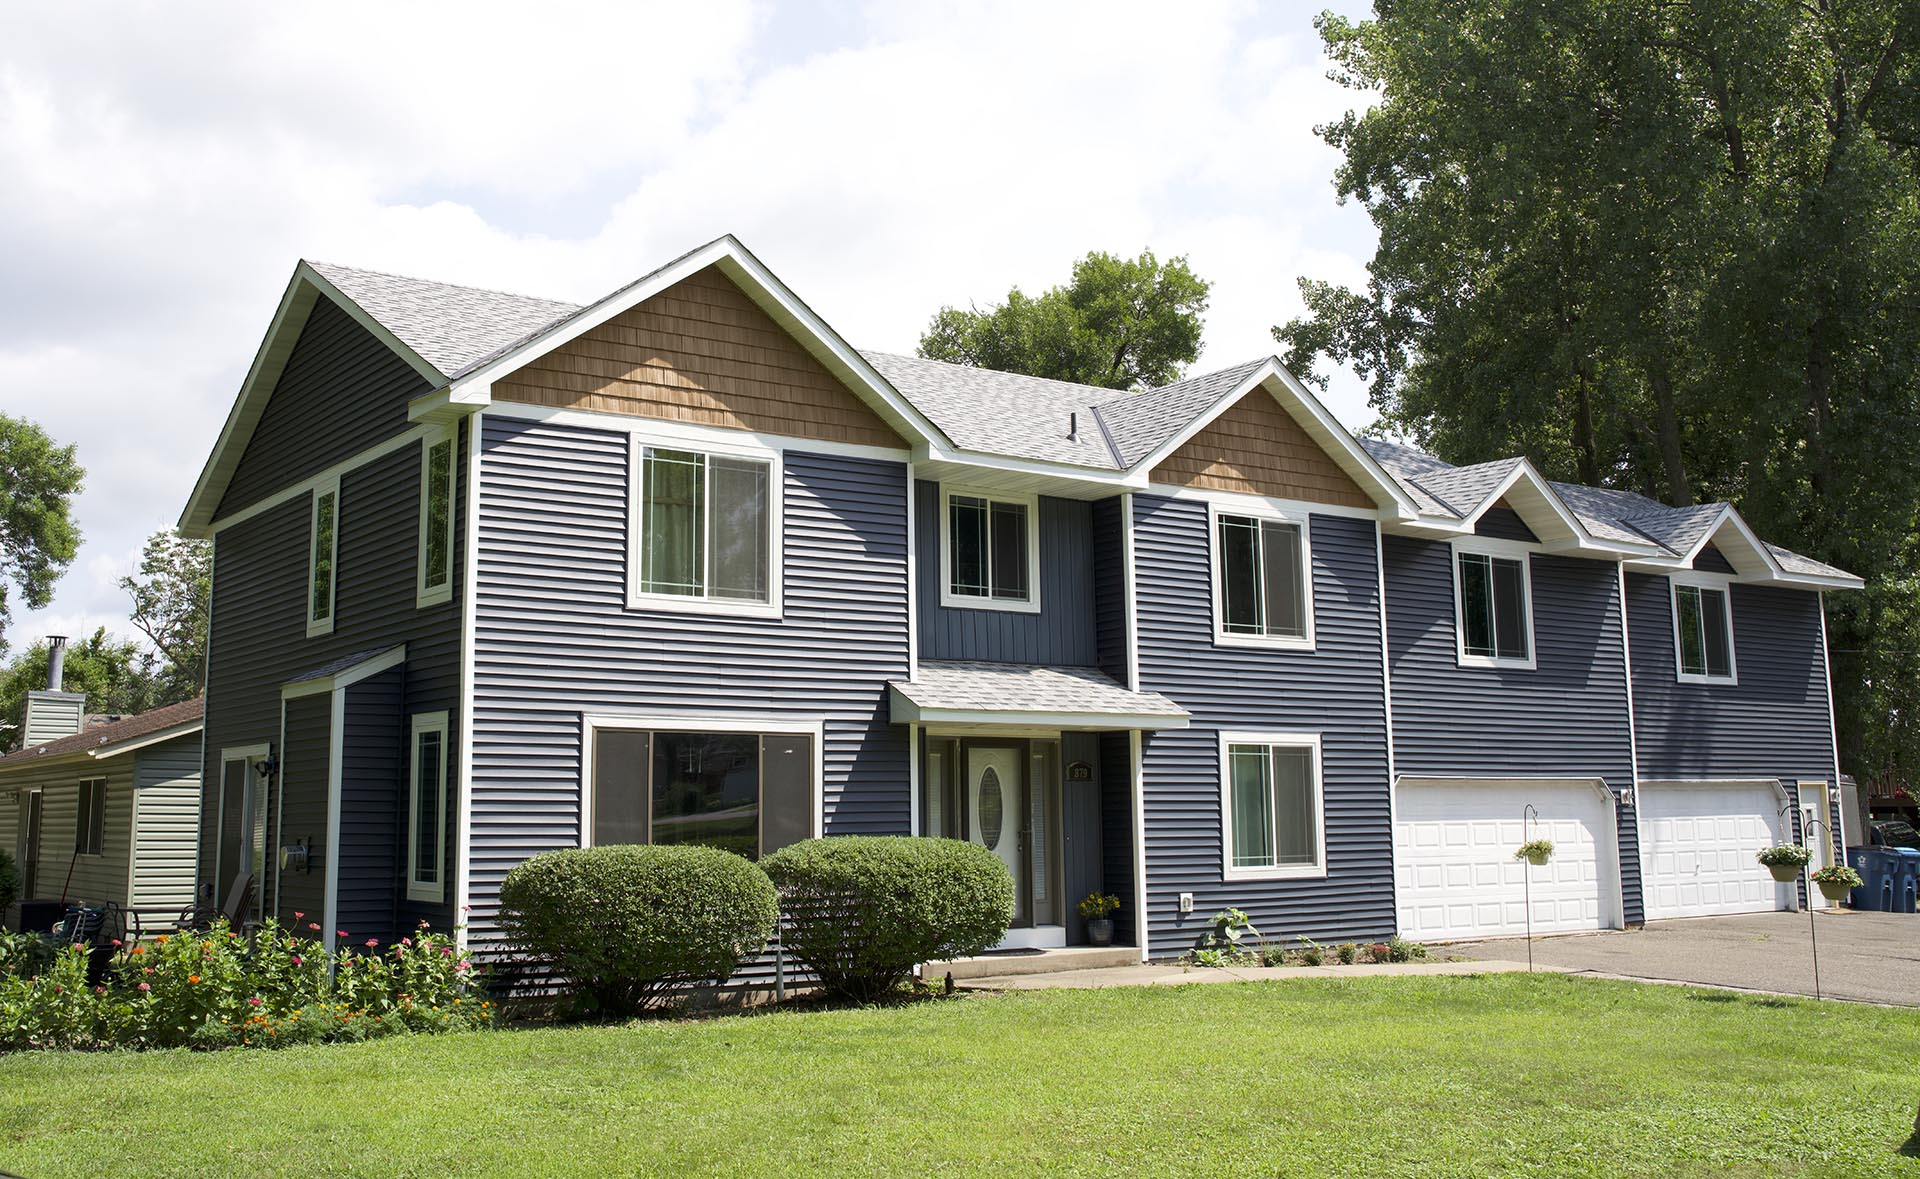 Multi-unit complex with two tone siding.